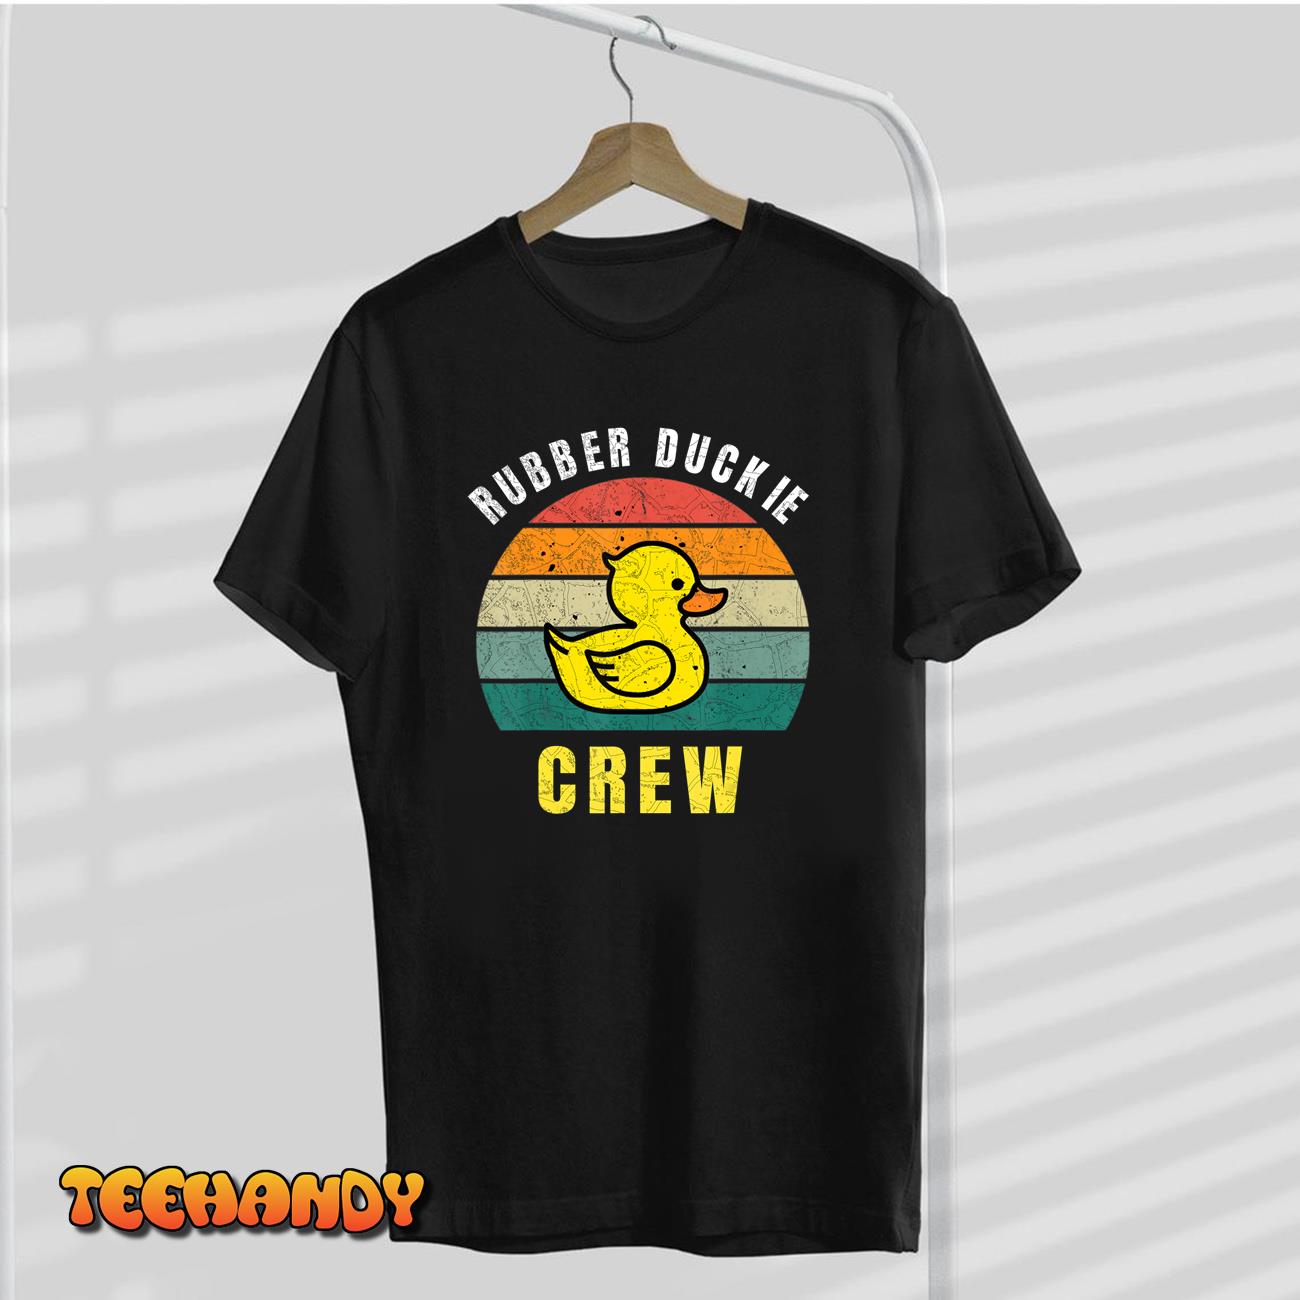 Rubber Duckie Crew T-Shirt - Funny Rubber Duck T-Shirt